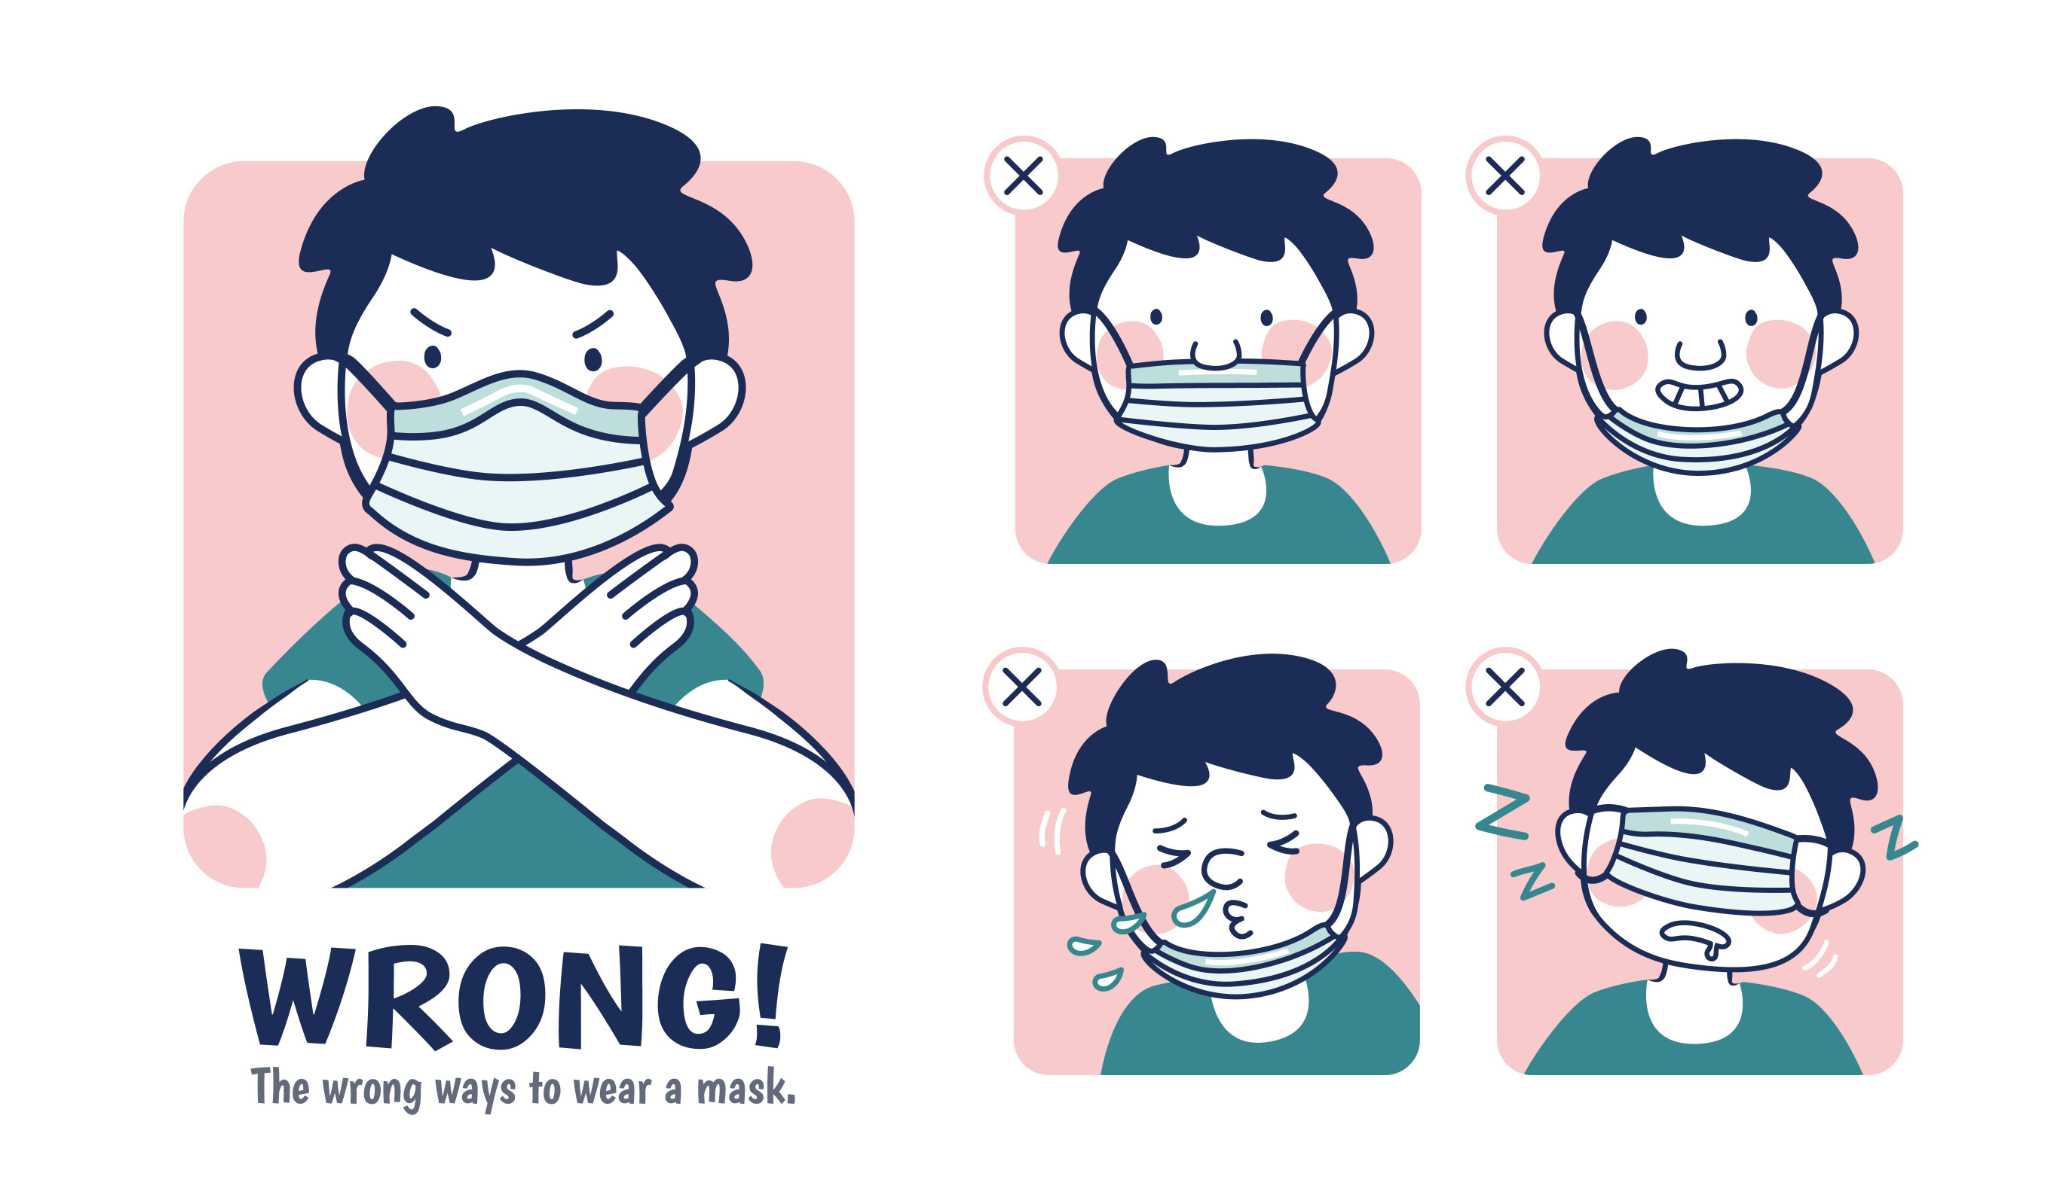 Masks are effective only if you wear them properly. Here's the right (and  wrong) way